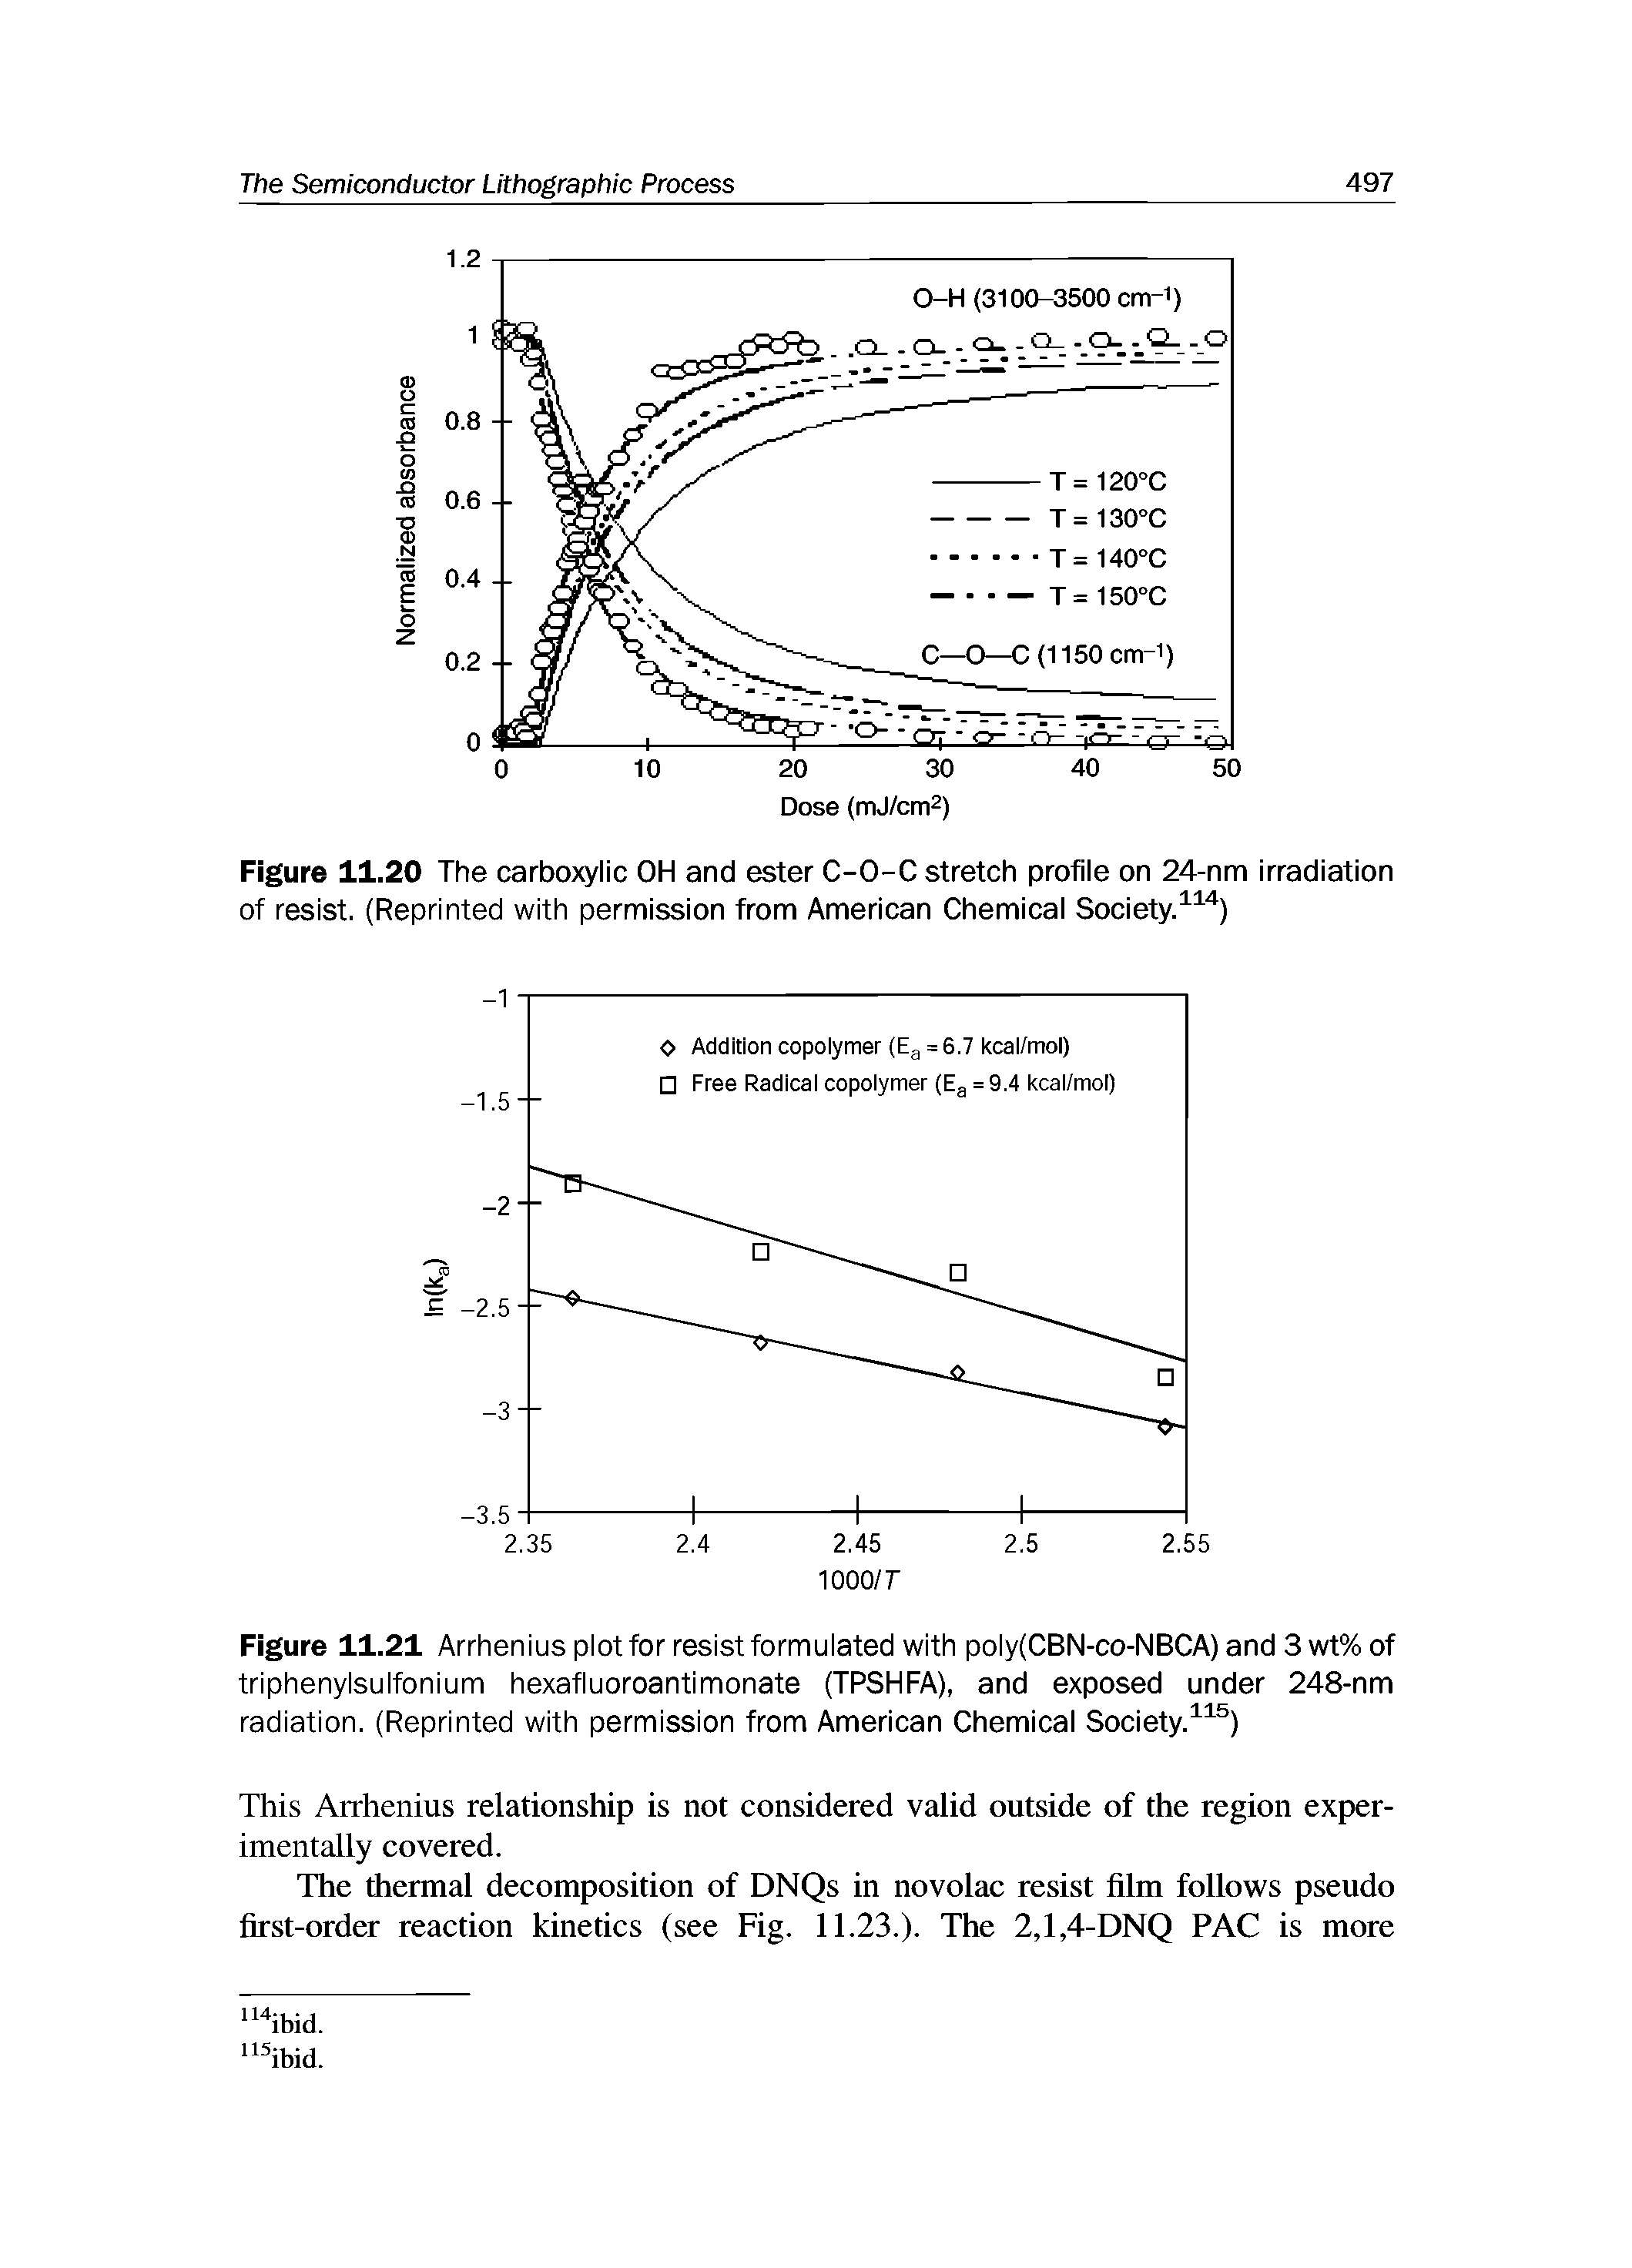 Figure 11.21 Arrhenius plot for resist formulated with poly(CBN-co-NBCA) and 3 wt% of triphenylsulfonium hexafluoroantimonate (TPSHFA), and exposed under 248-nm radiation. (Reprinted with permission from American Chemical Society. )...